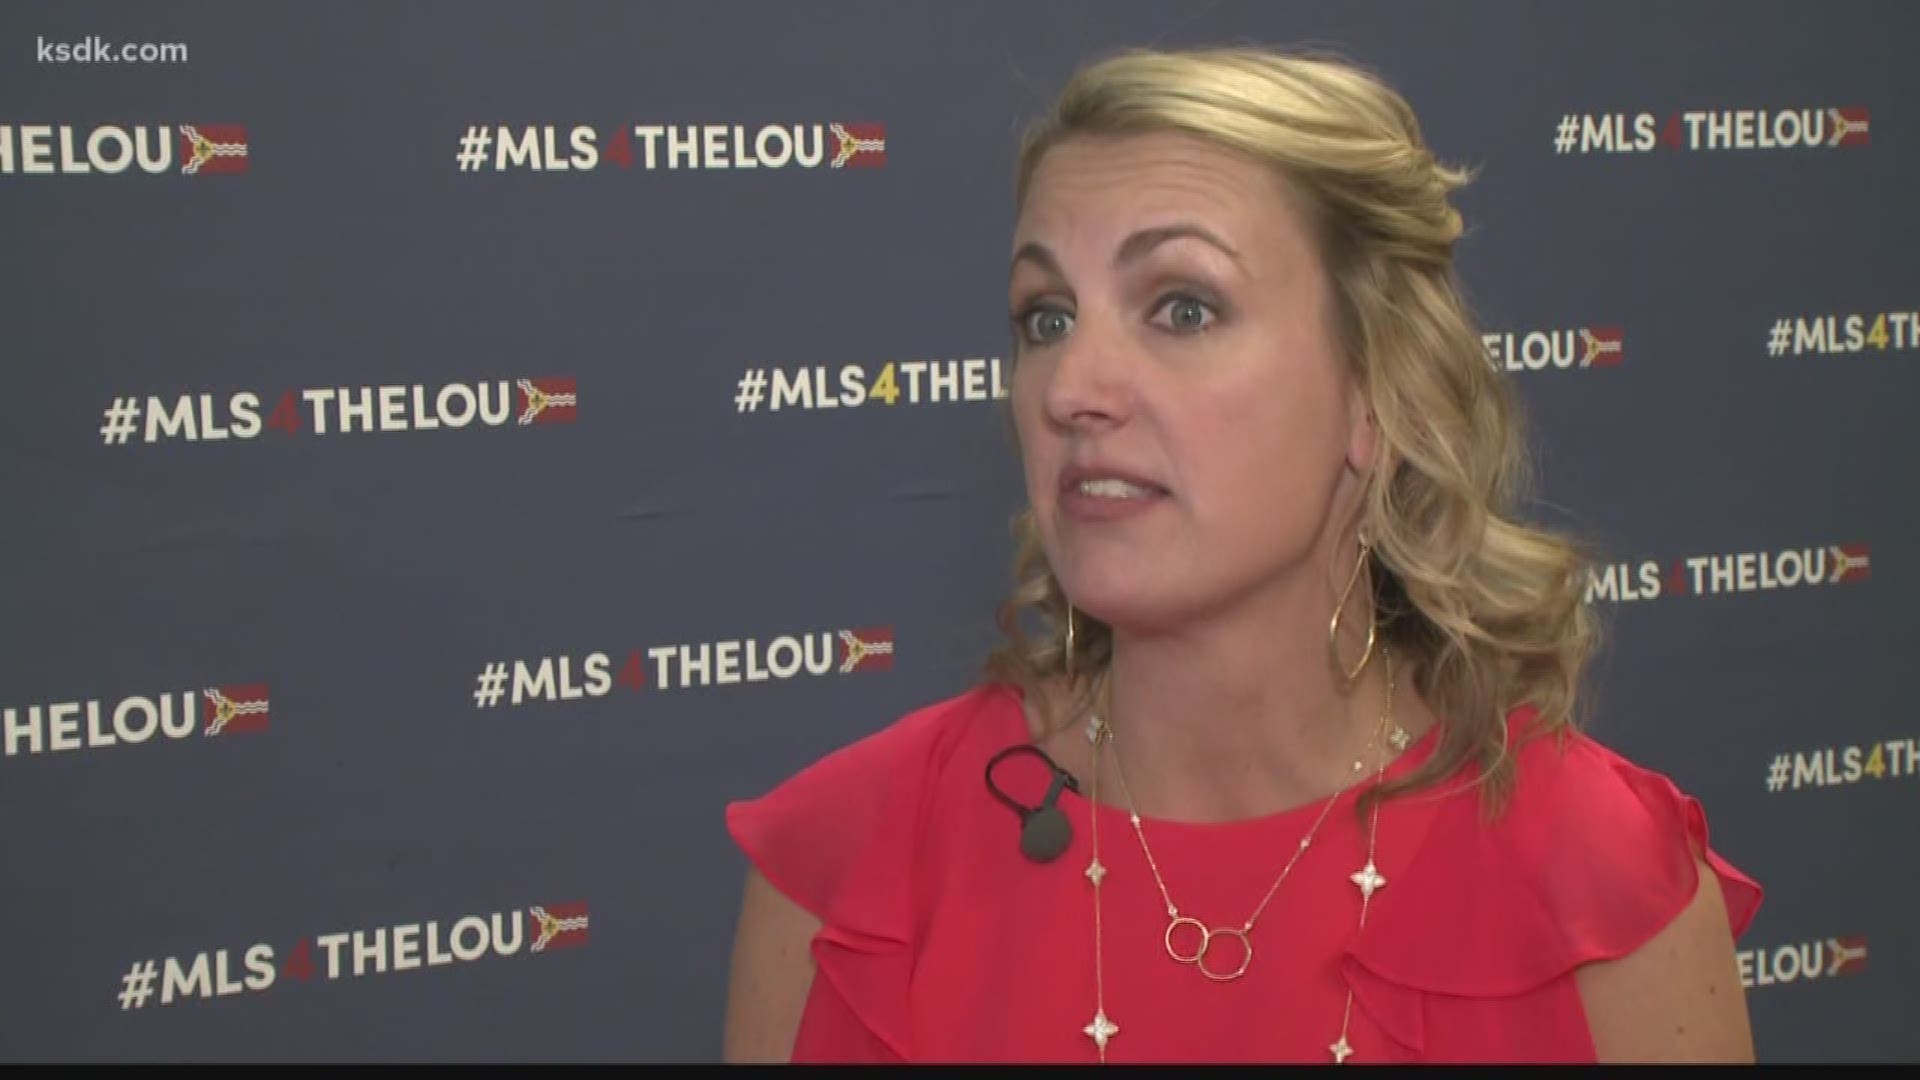 The MLS may be the biggest storyline of the spring in St. Louis sports.